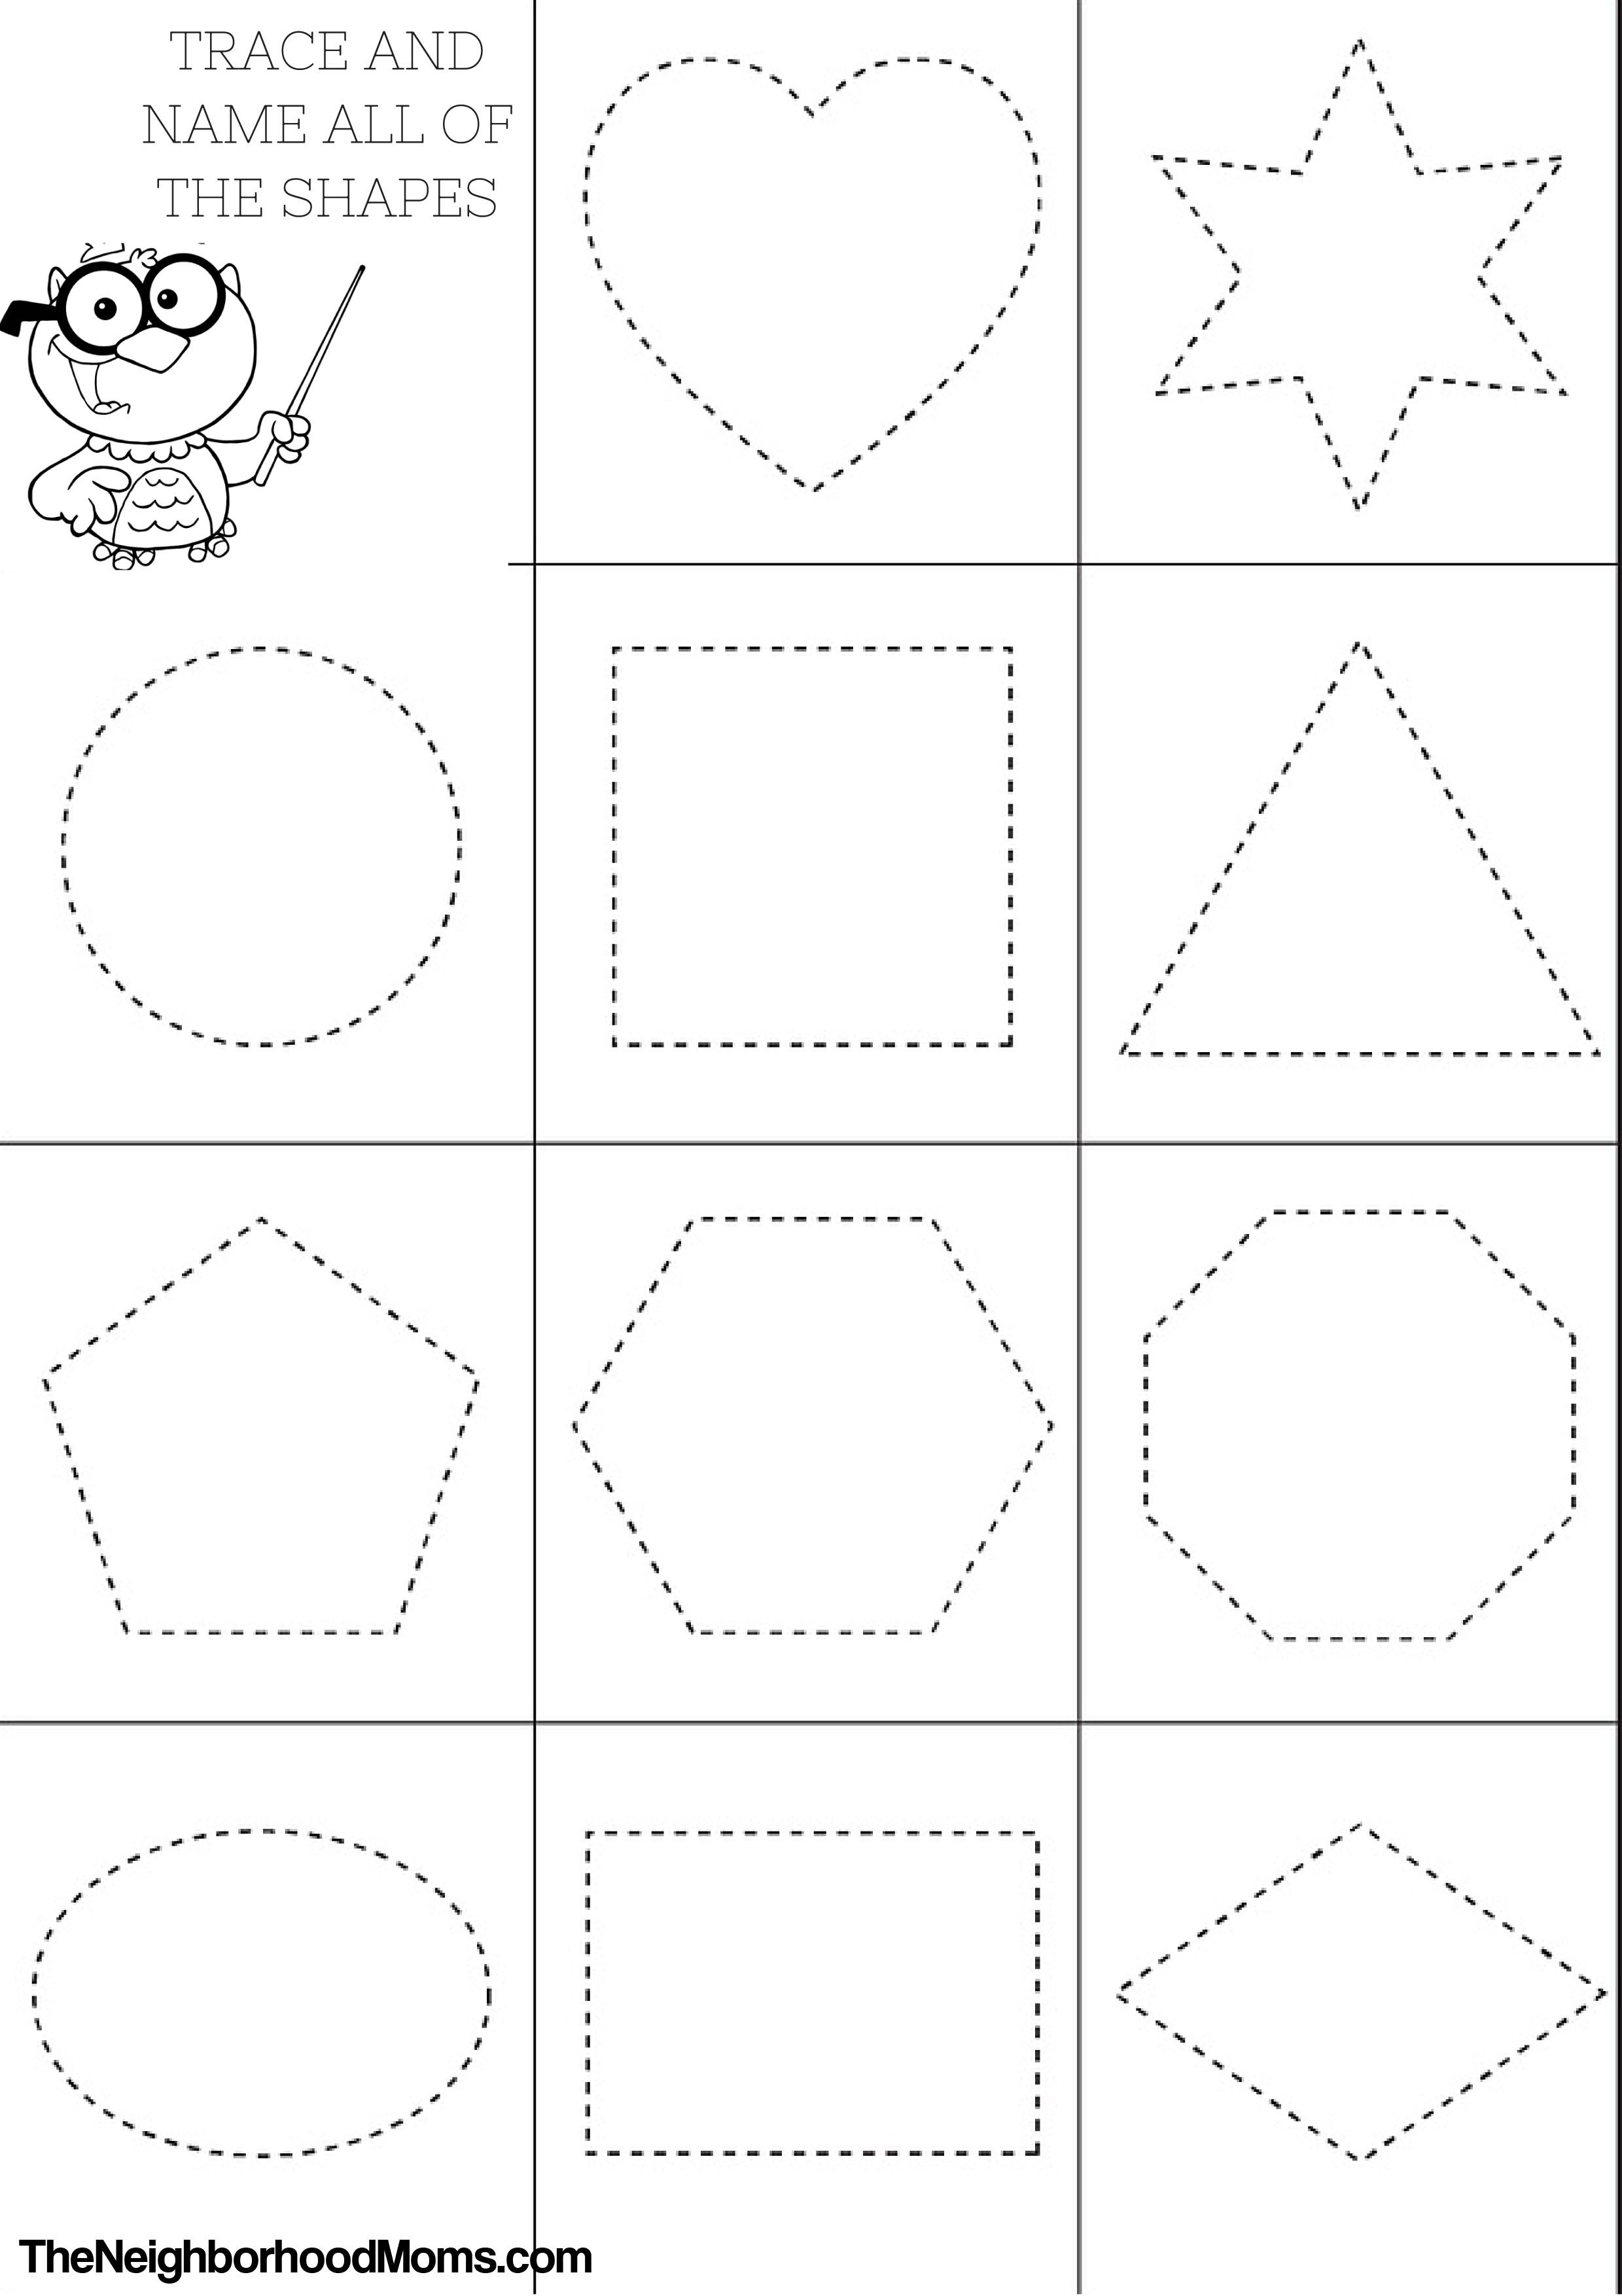 Shapes coloring pages printable printable shapes shapes worksheets shape coloring pages